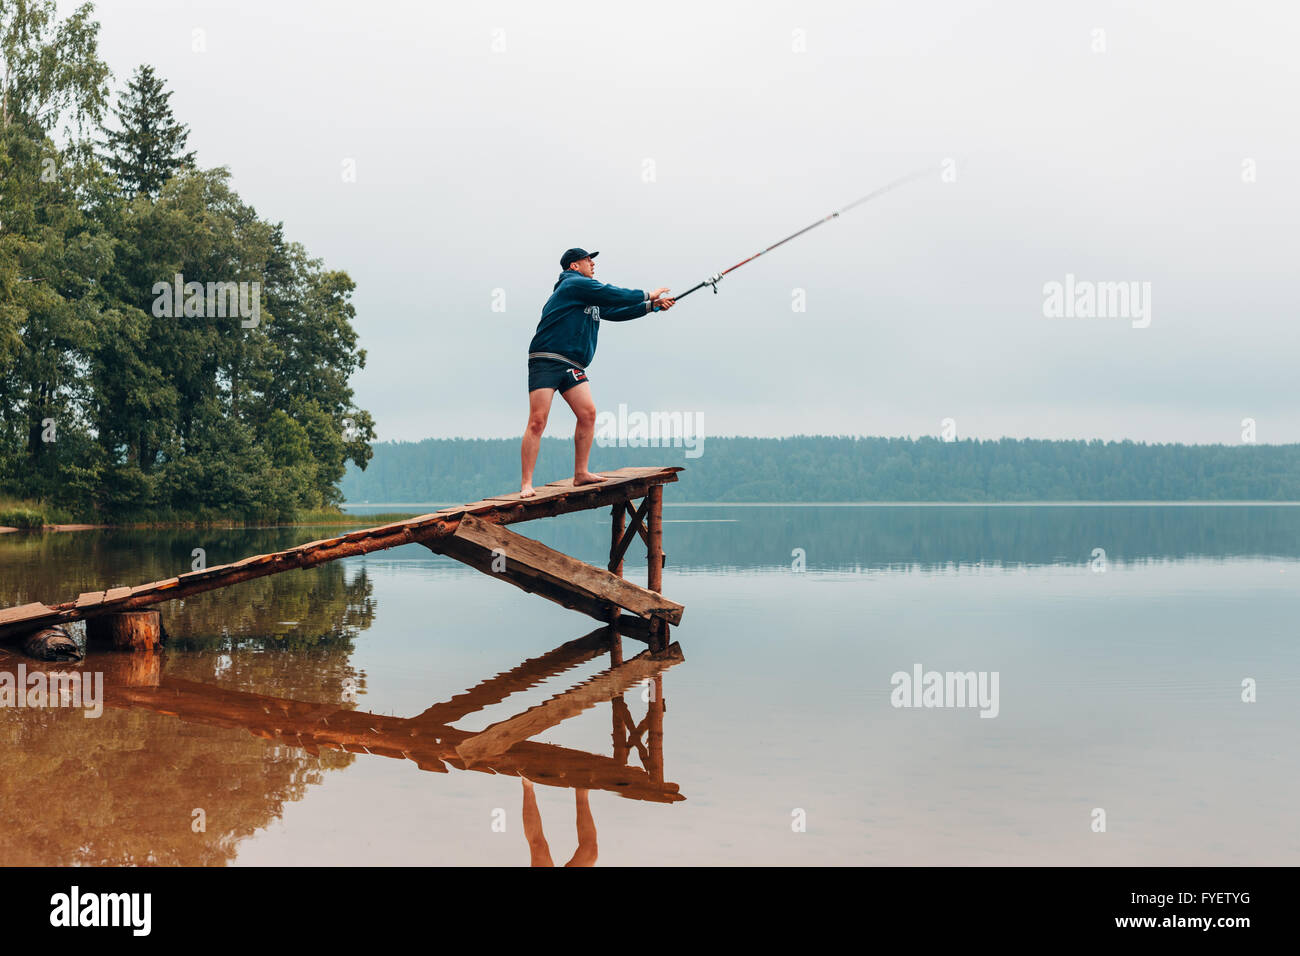 Man throws a fishing rod in the lake. Stock Photo